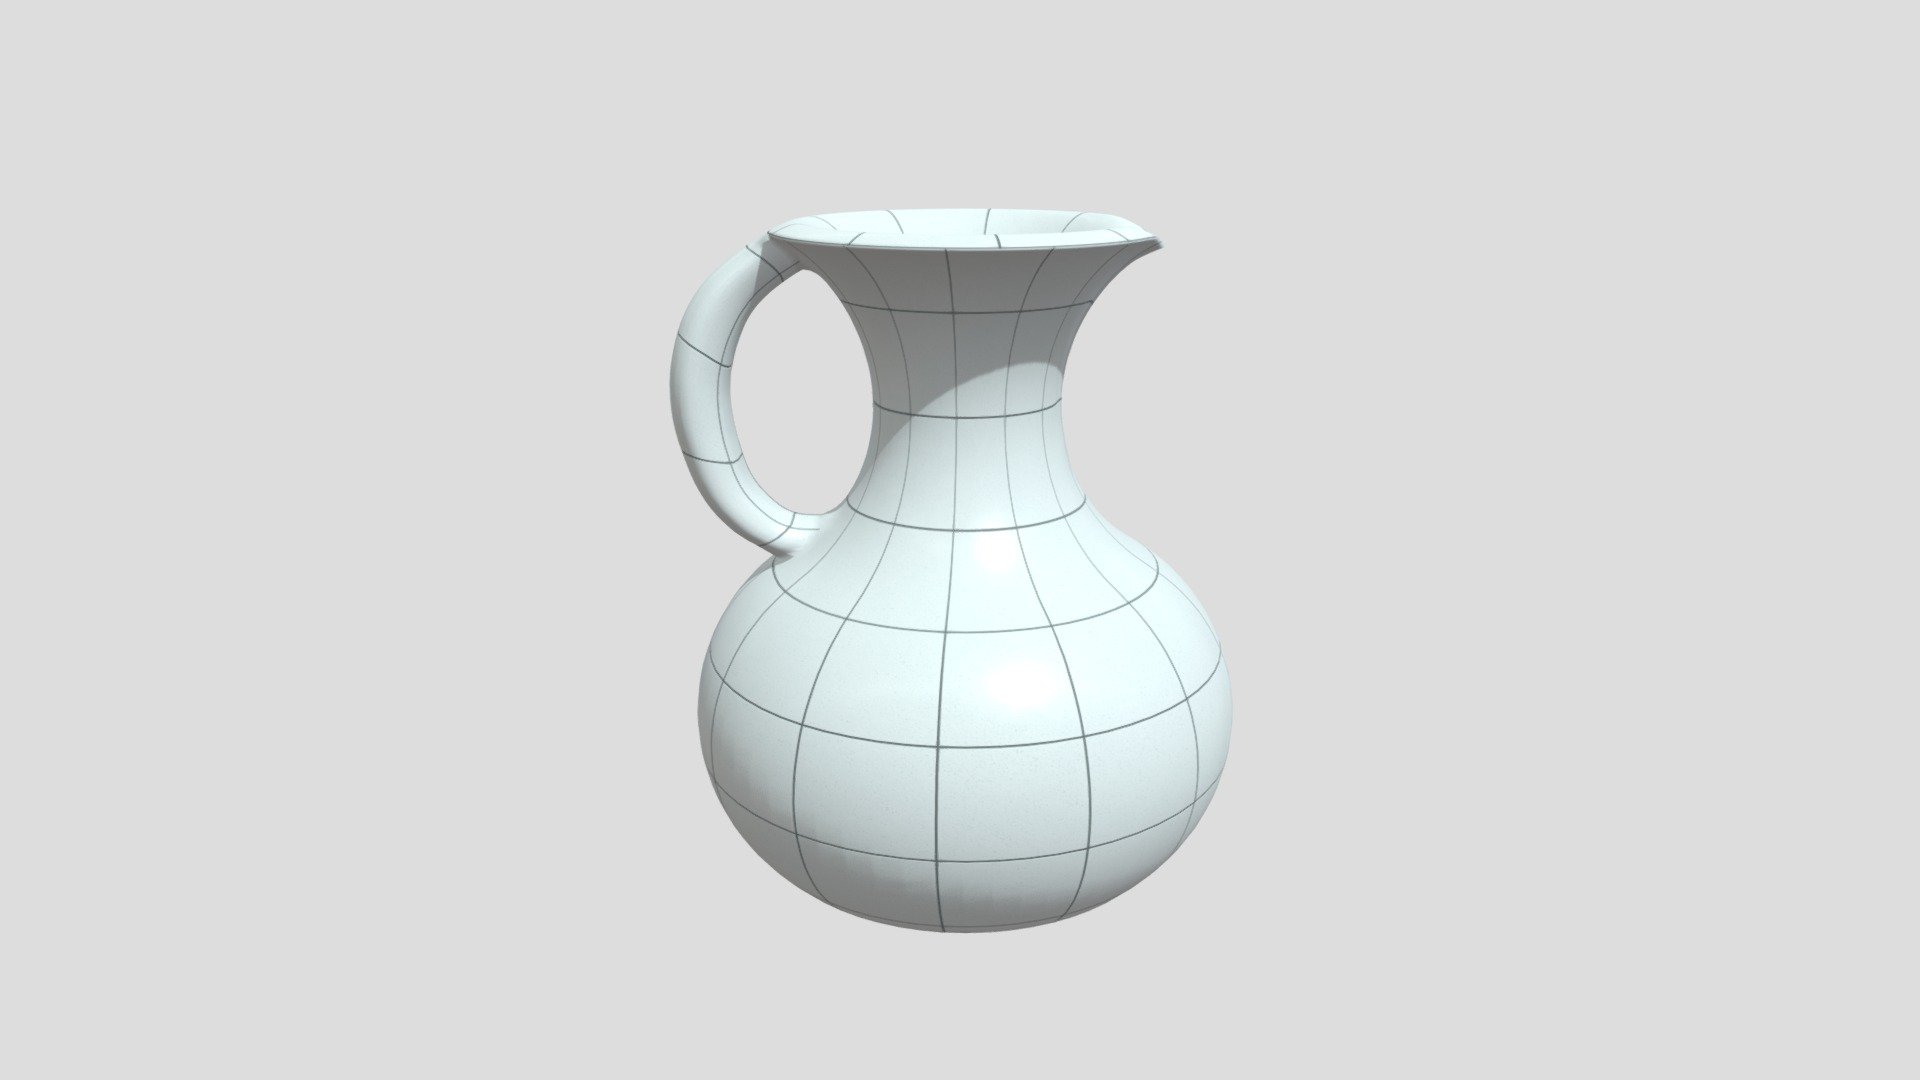 This model has such material with the following 4K textures:

MI_CeramicTileClean01

T_CeramicTileClean01_AO.png
T_CeramicTileClean01_BC.png
T_CeramicTileClean01_MT.png
T_CeramicTileClean01_N.png
T_CeramicTileClean01_R.png - Water Jug - 3D model by vova12zx 3d model